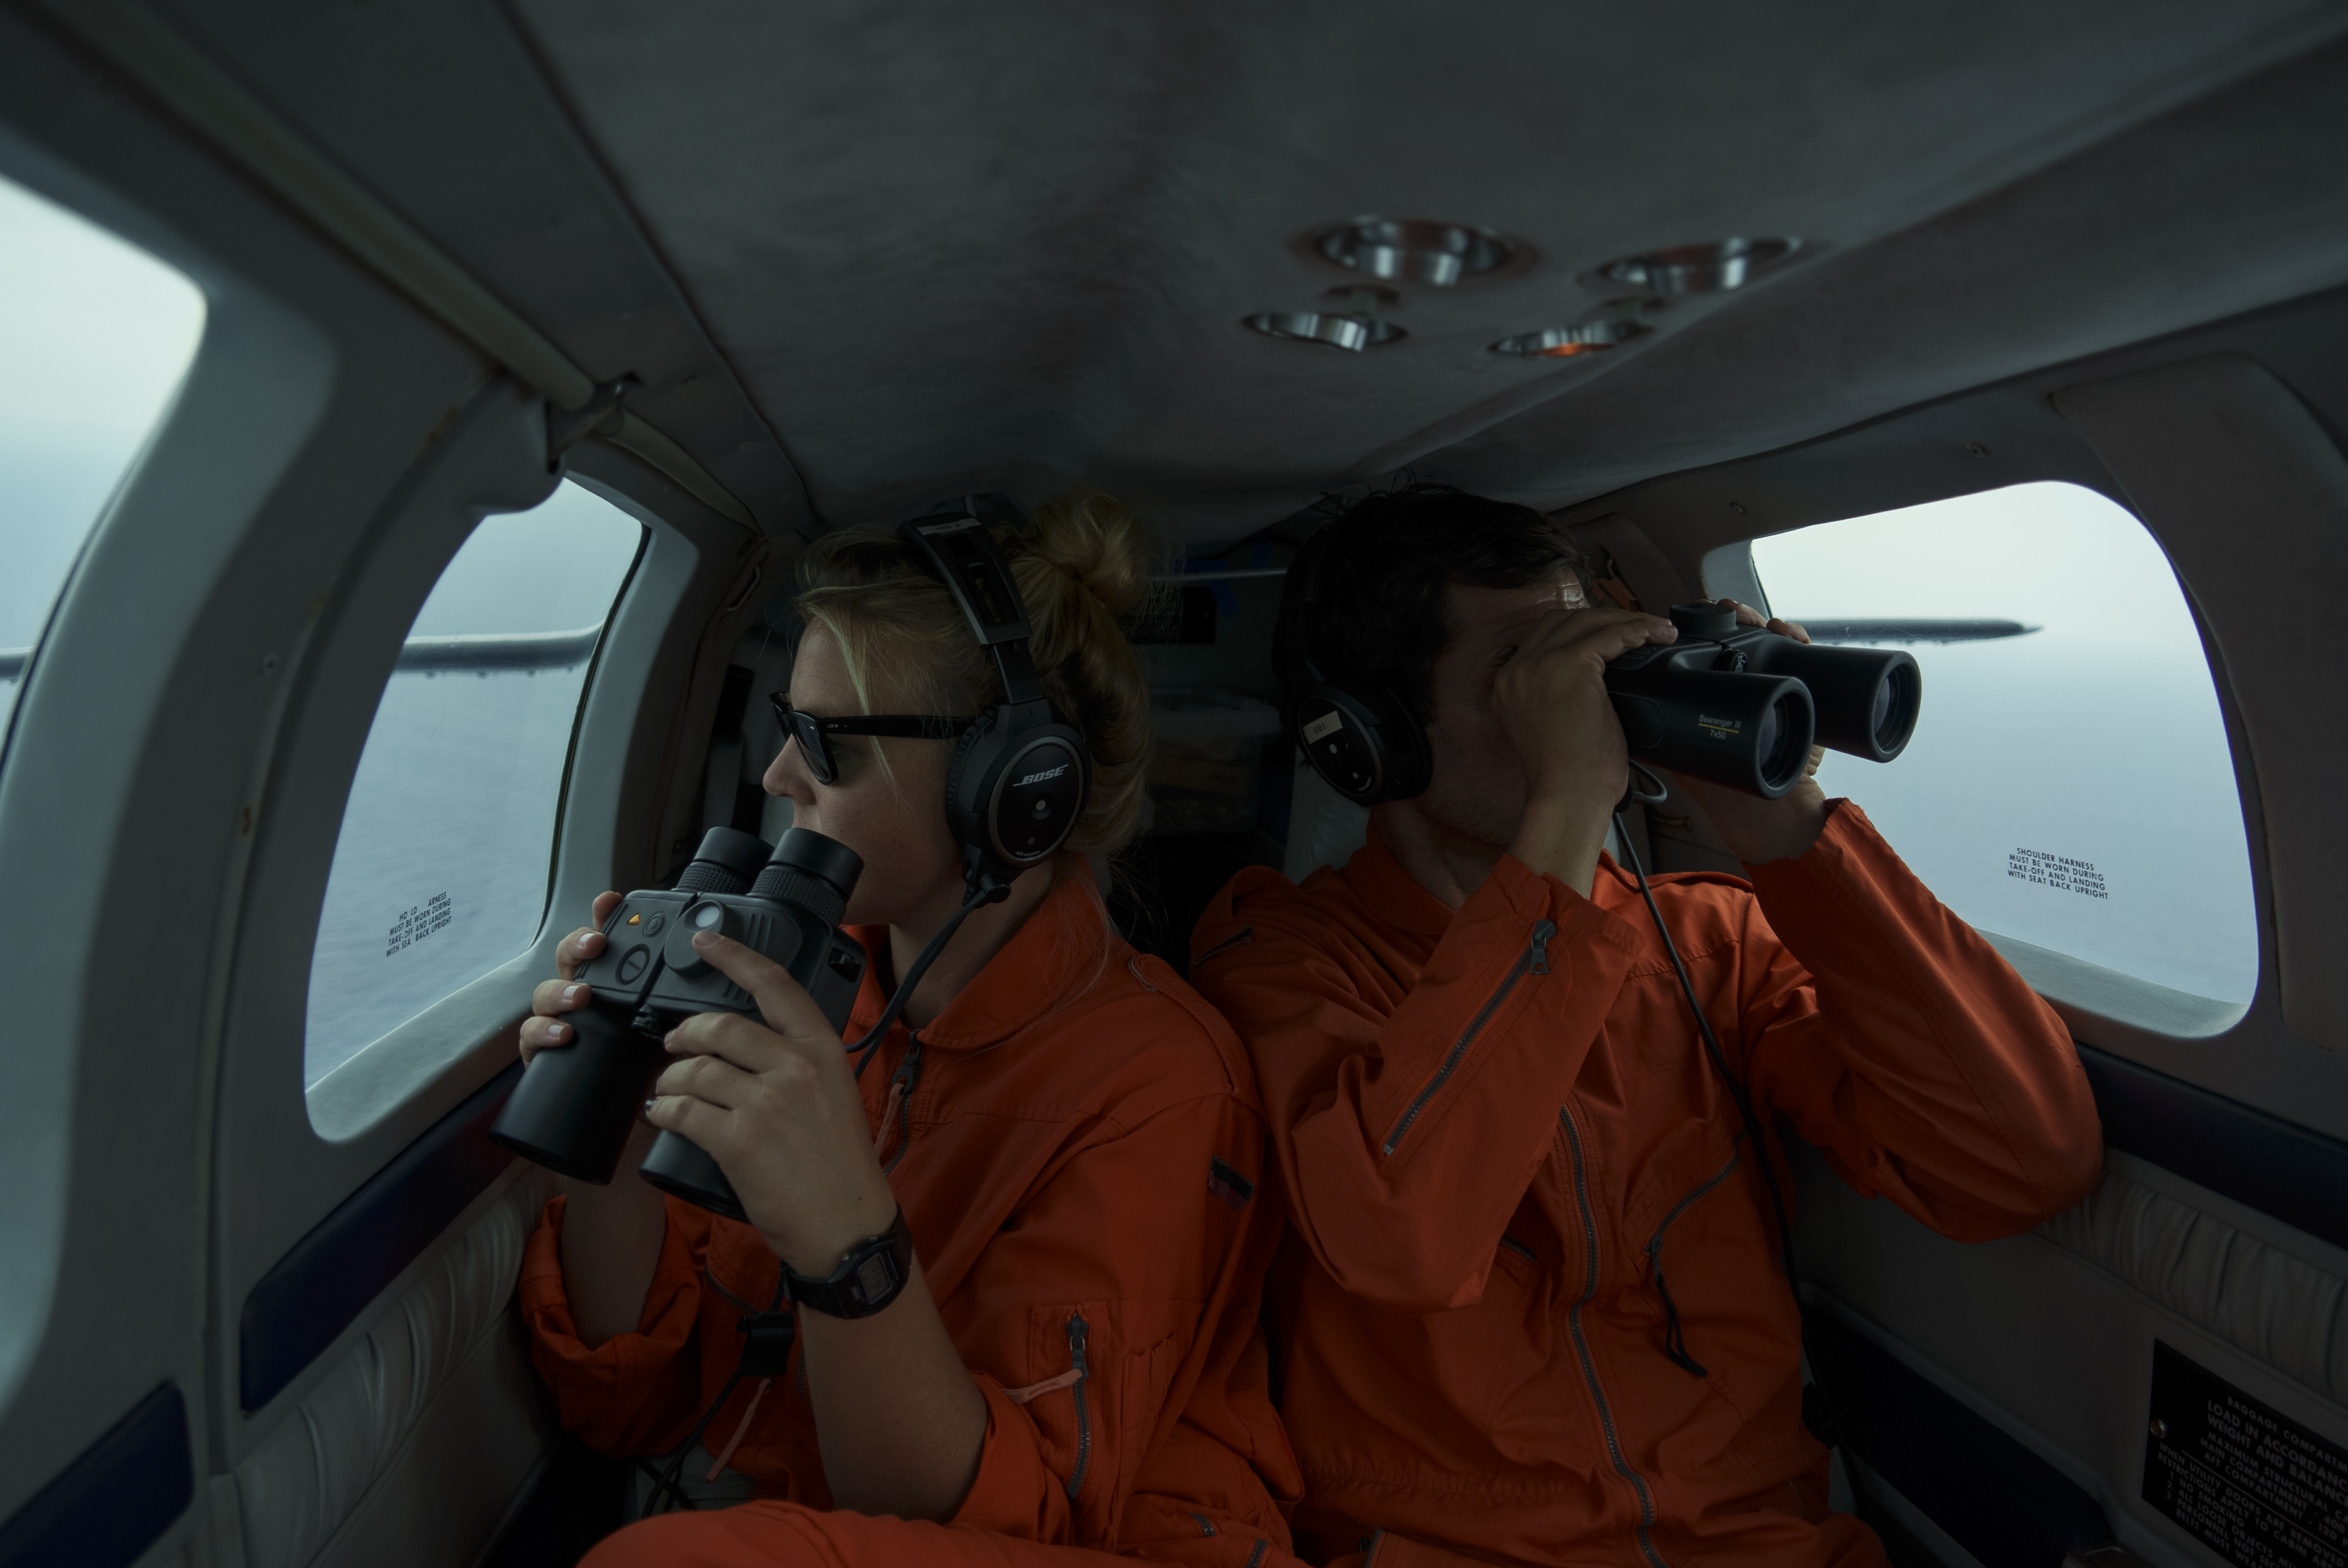 Volunteers aboard the Seabird, a plane operated by the rescue NGO Sea-Watch, look for boats in distress as they fly over the Mediterranean Sea between Libya and the Italian island of Lampedusa, October 5, 2021.